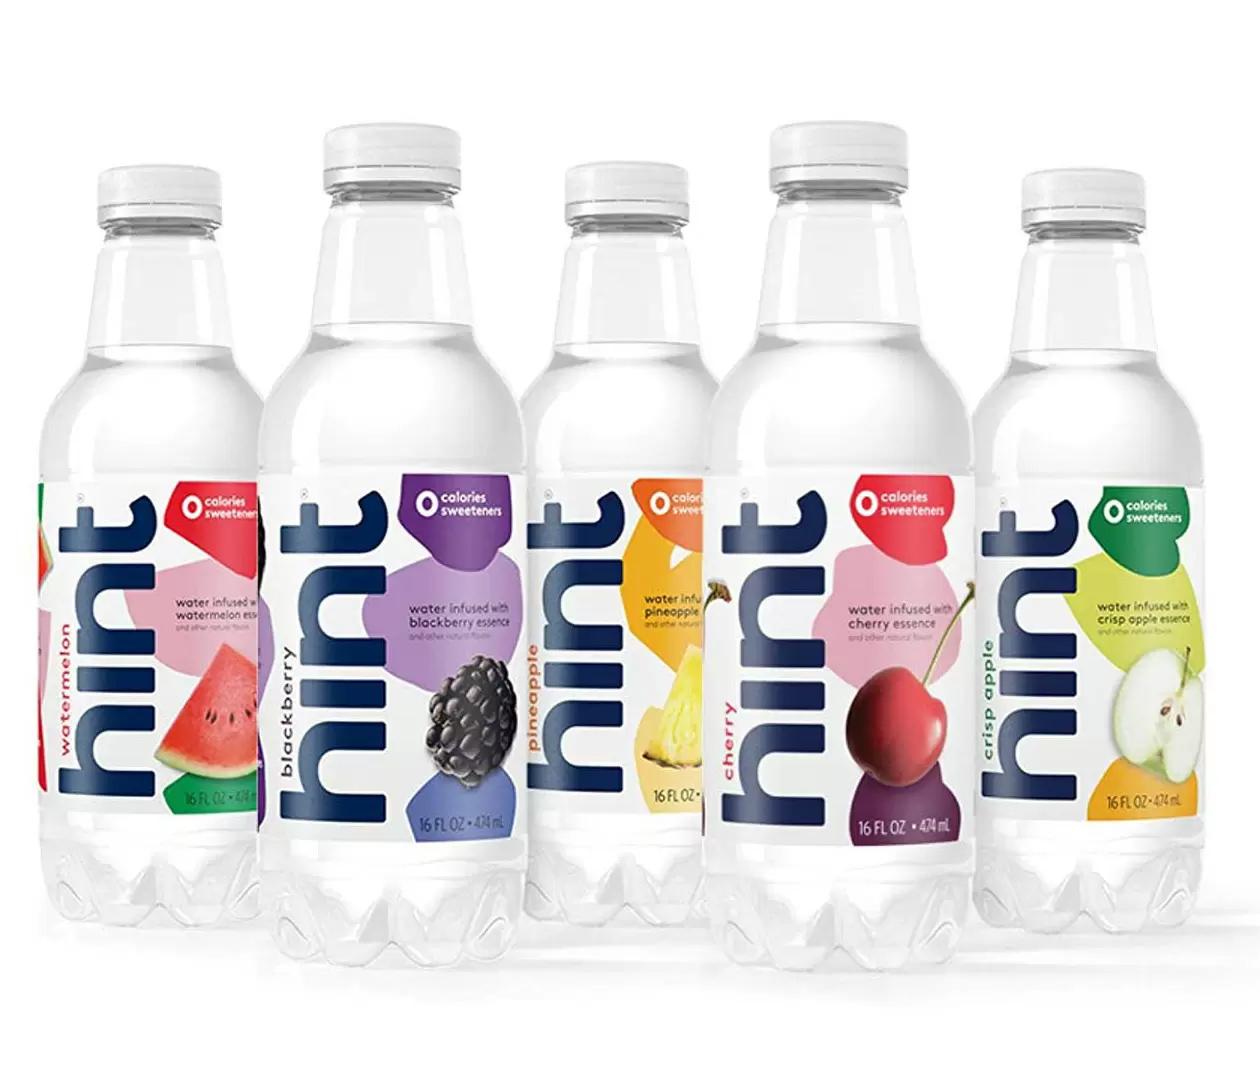 24 Hint Fruit Infused Water for $14.47